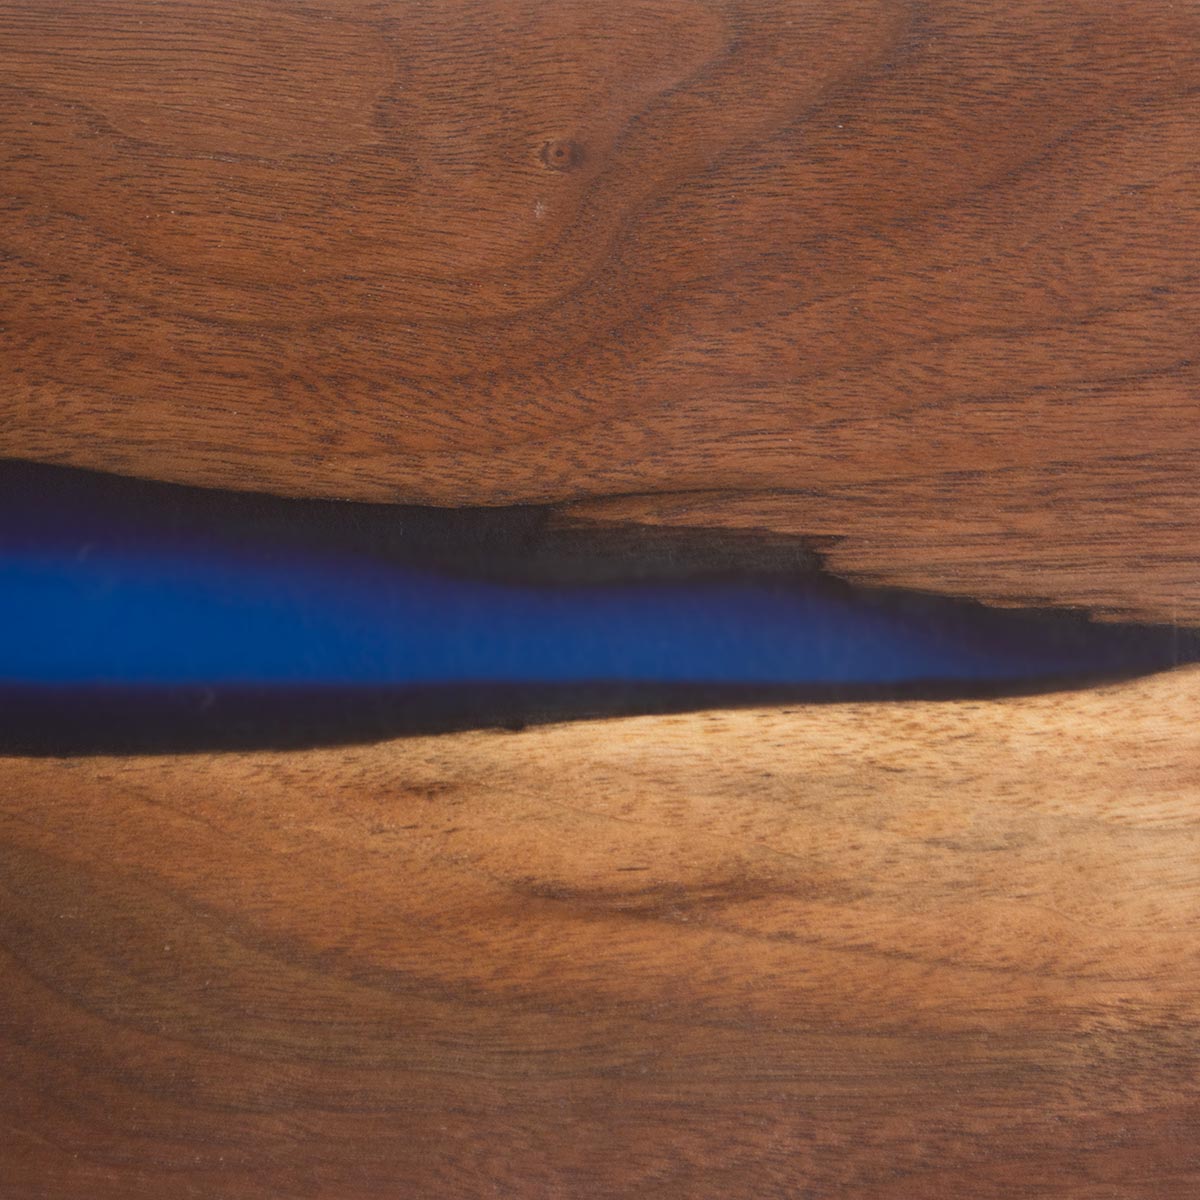 walnut wood grain close up view of a magnetic knife holder made with epoxy resin and live edge wood